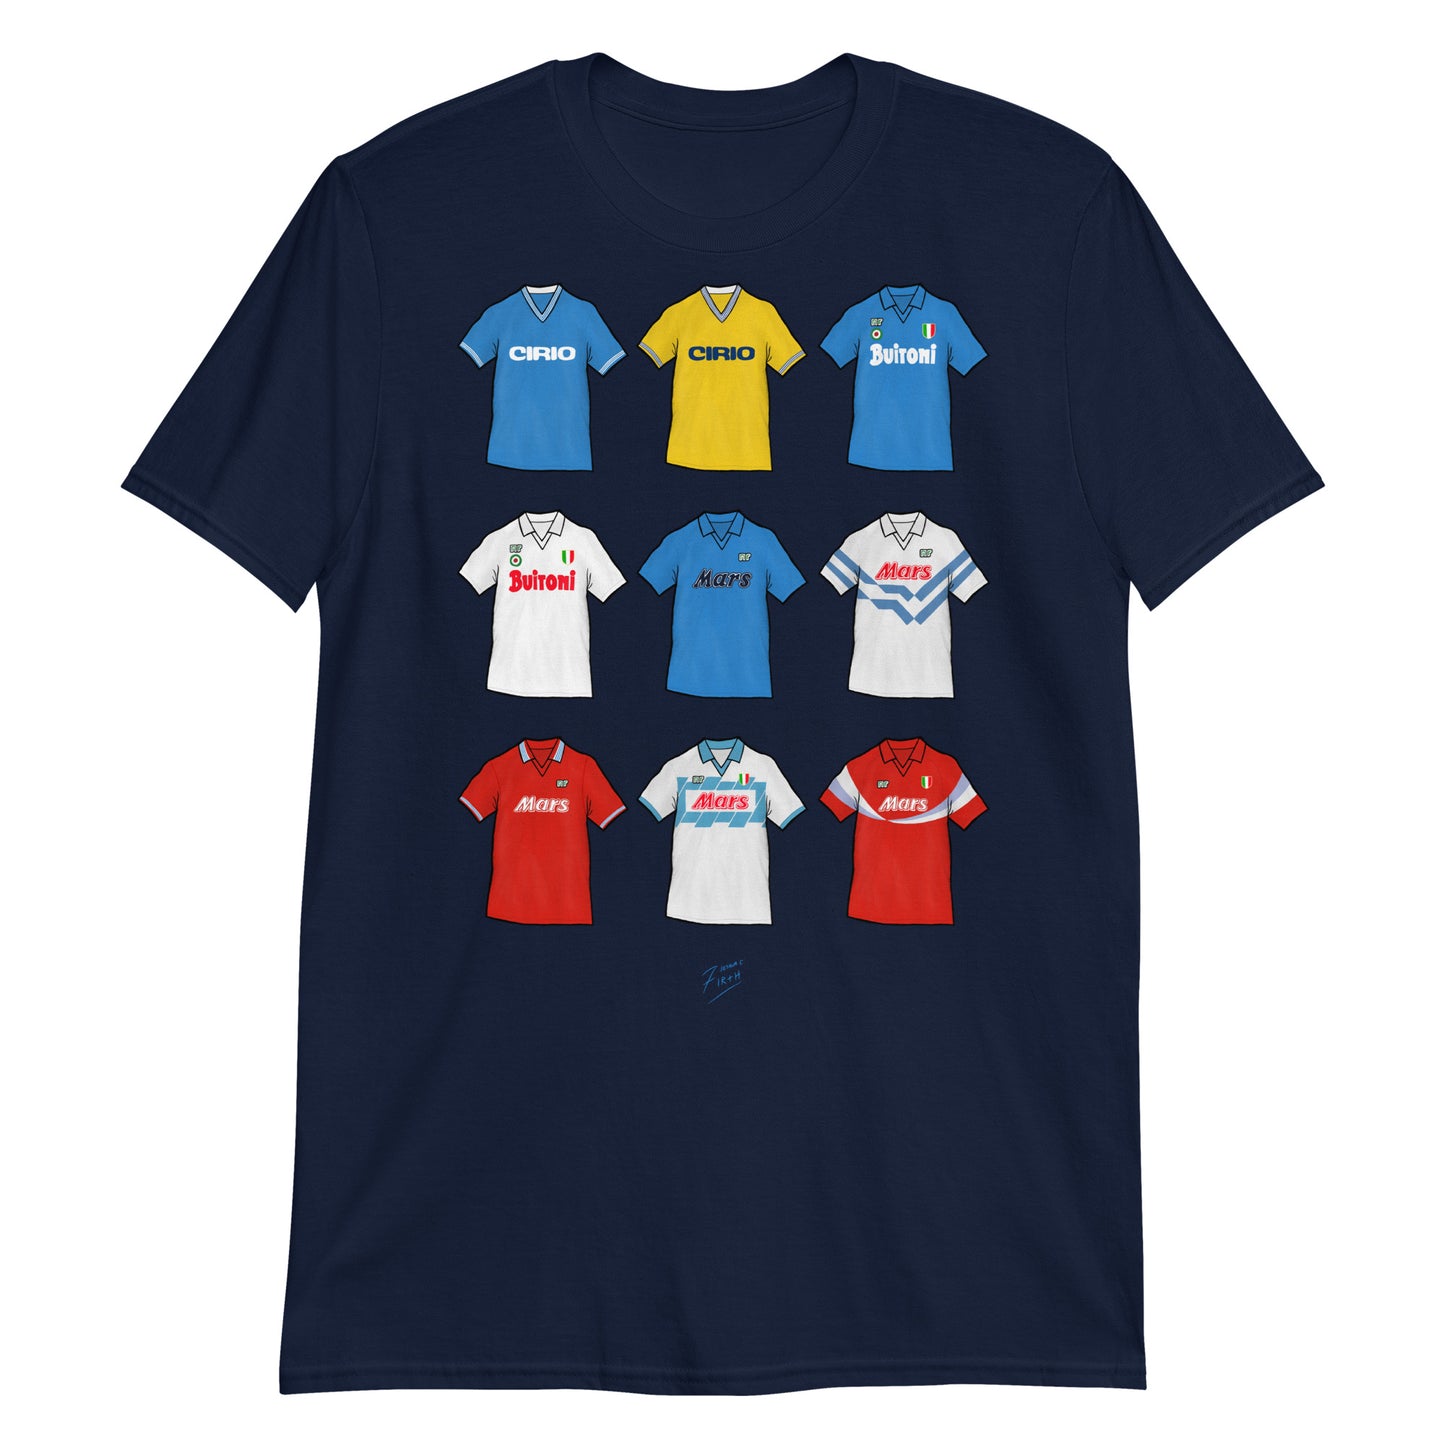 Navy Blue Napoli Themed T-shirt inspired by the jerseys of the past from when Diego Maradona used to play for them!